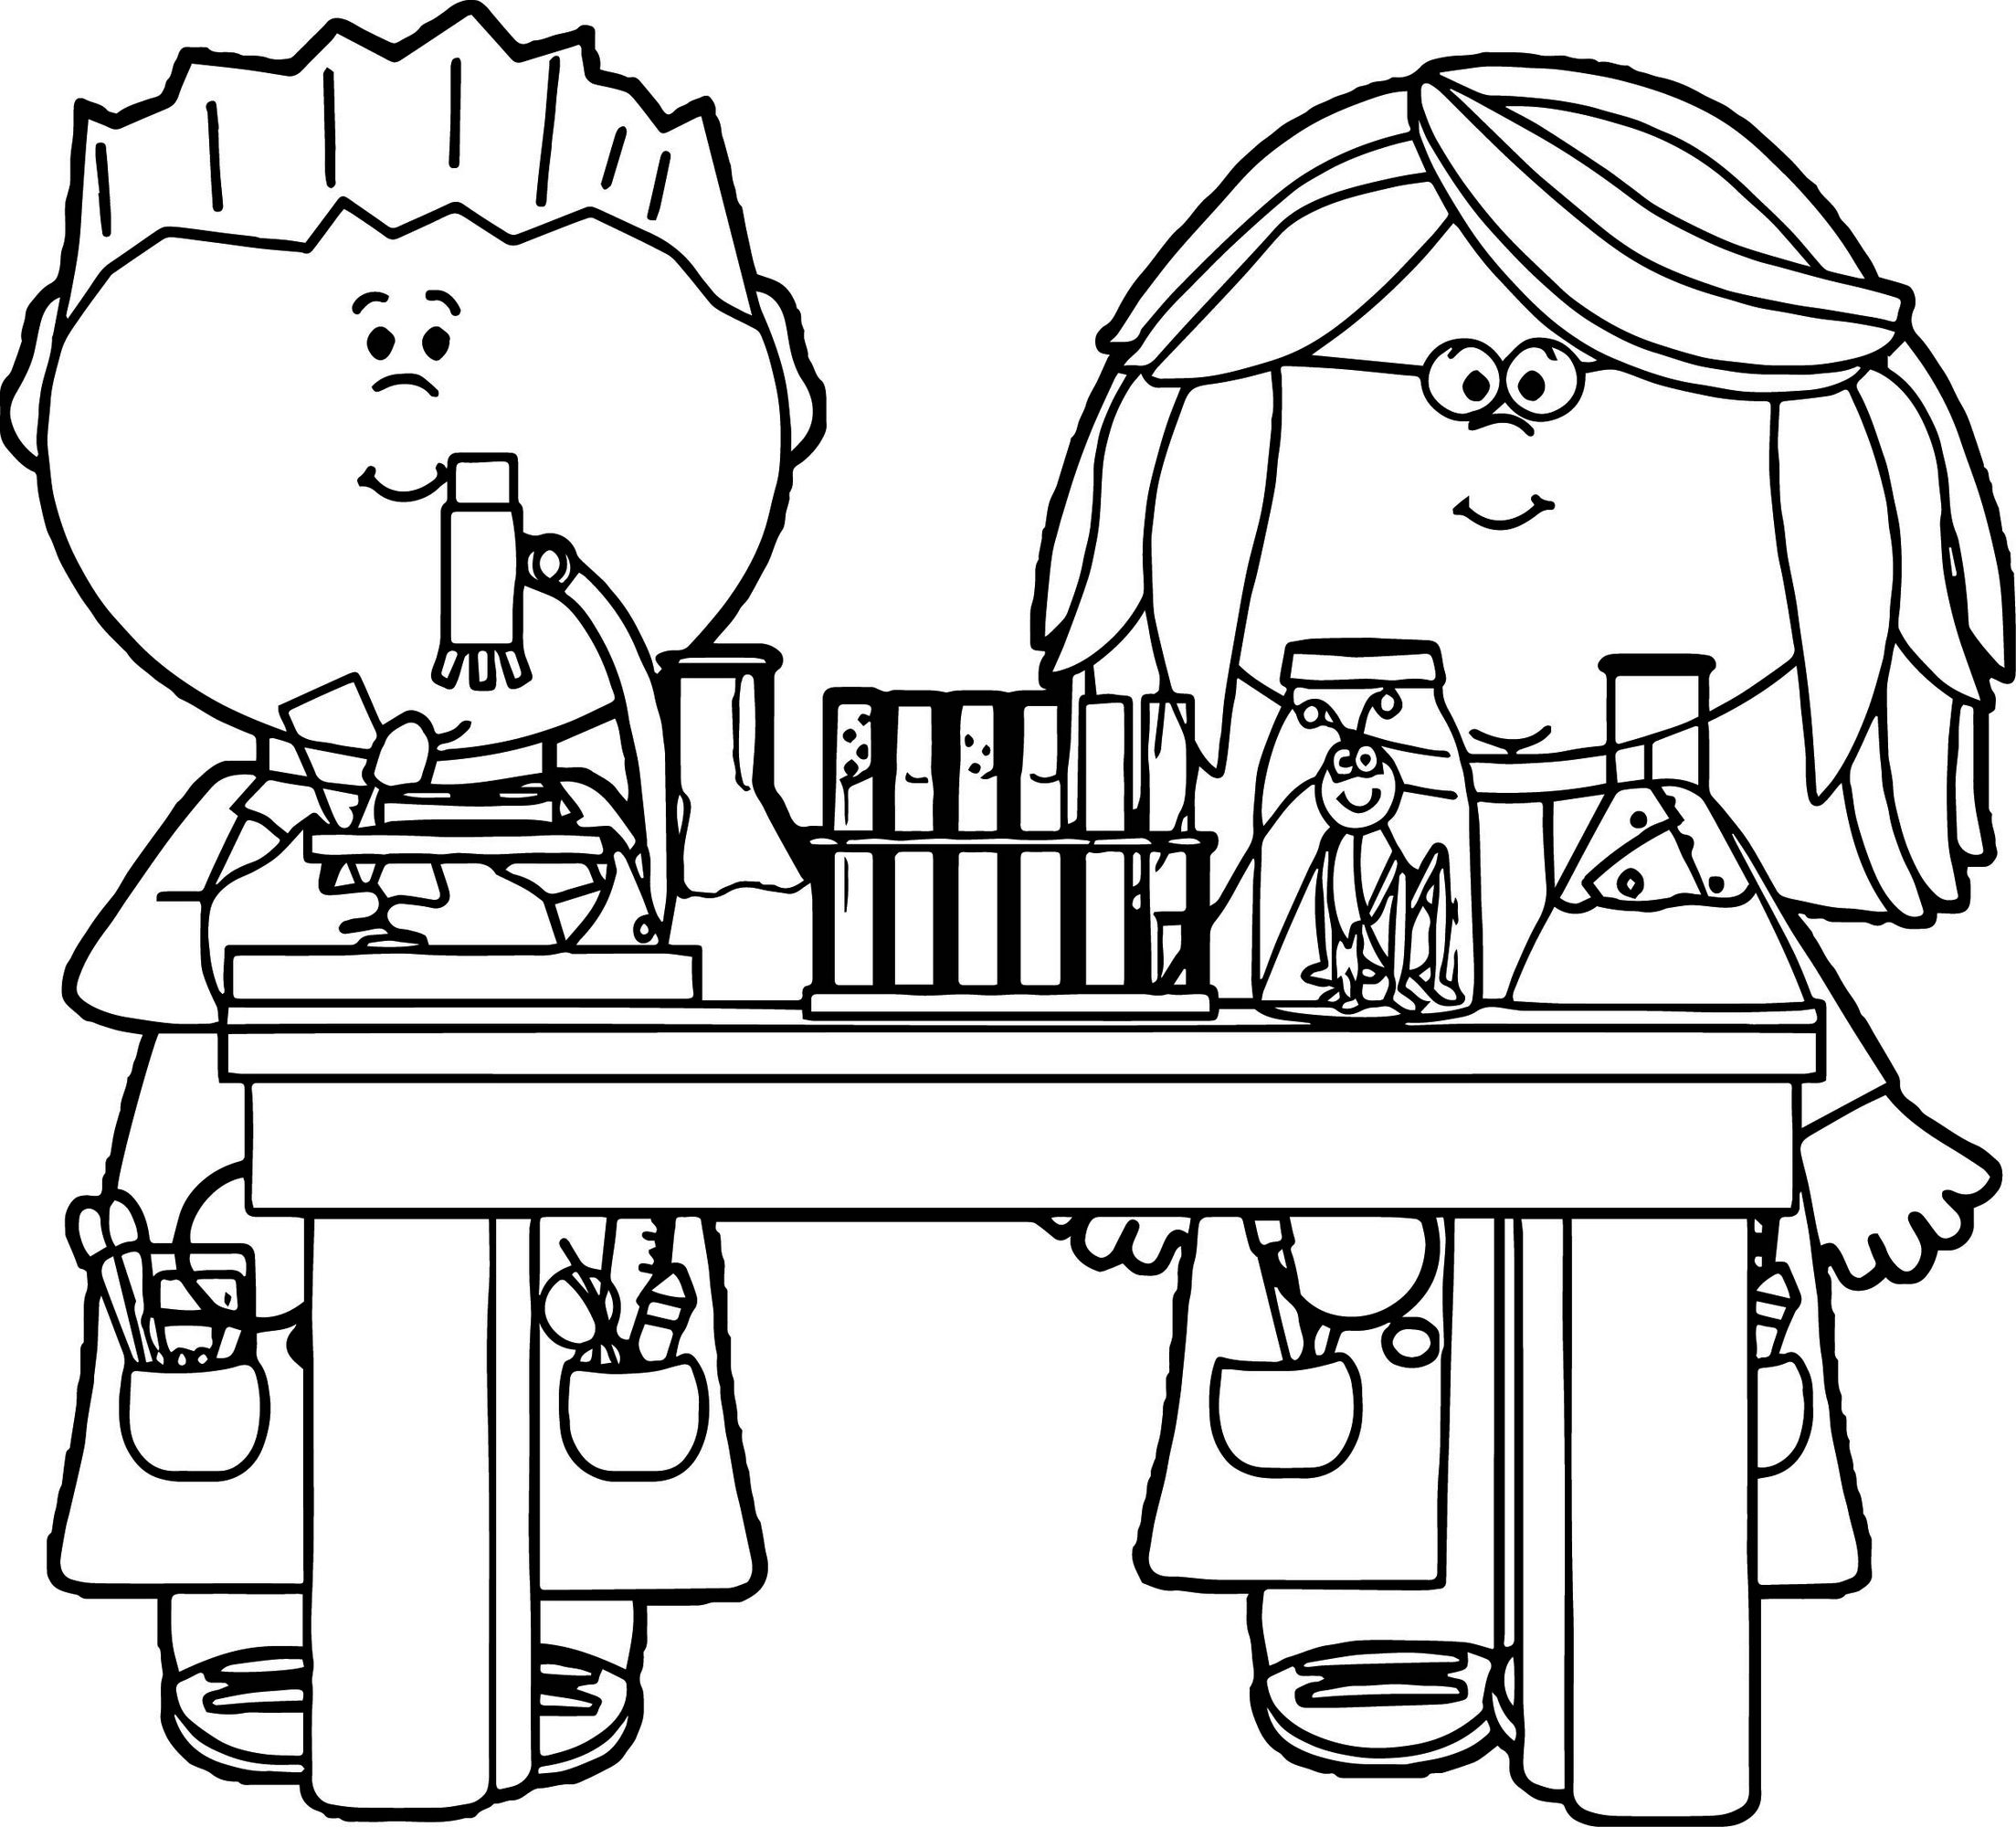 Kids In Science Class Coloring Page Printable